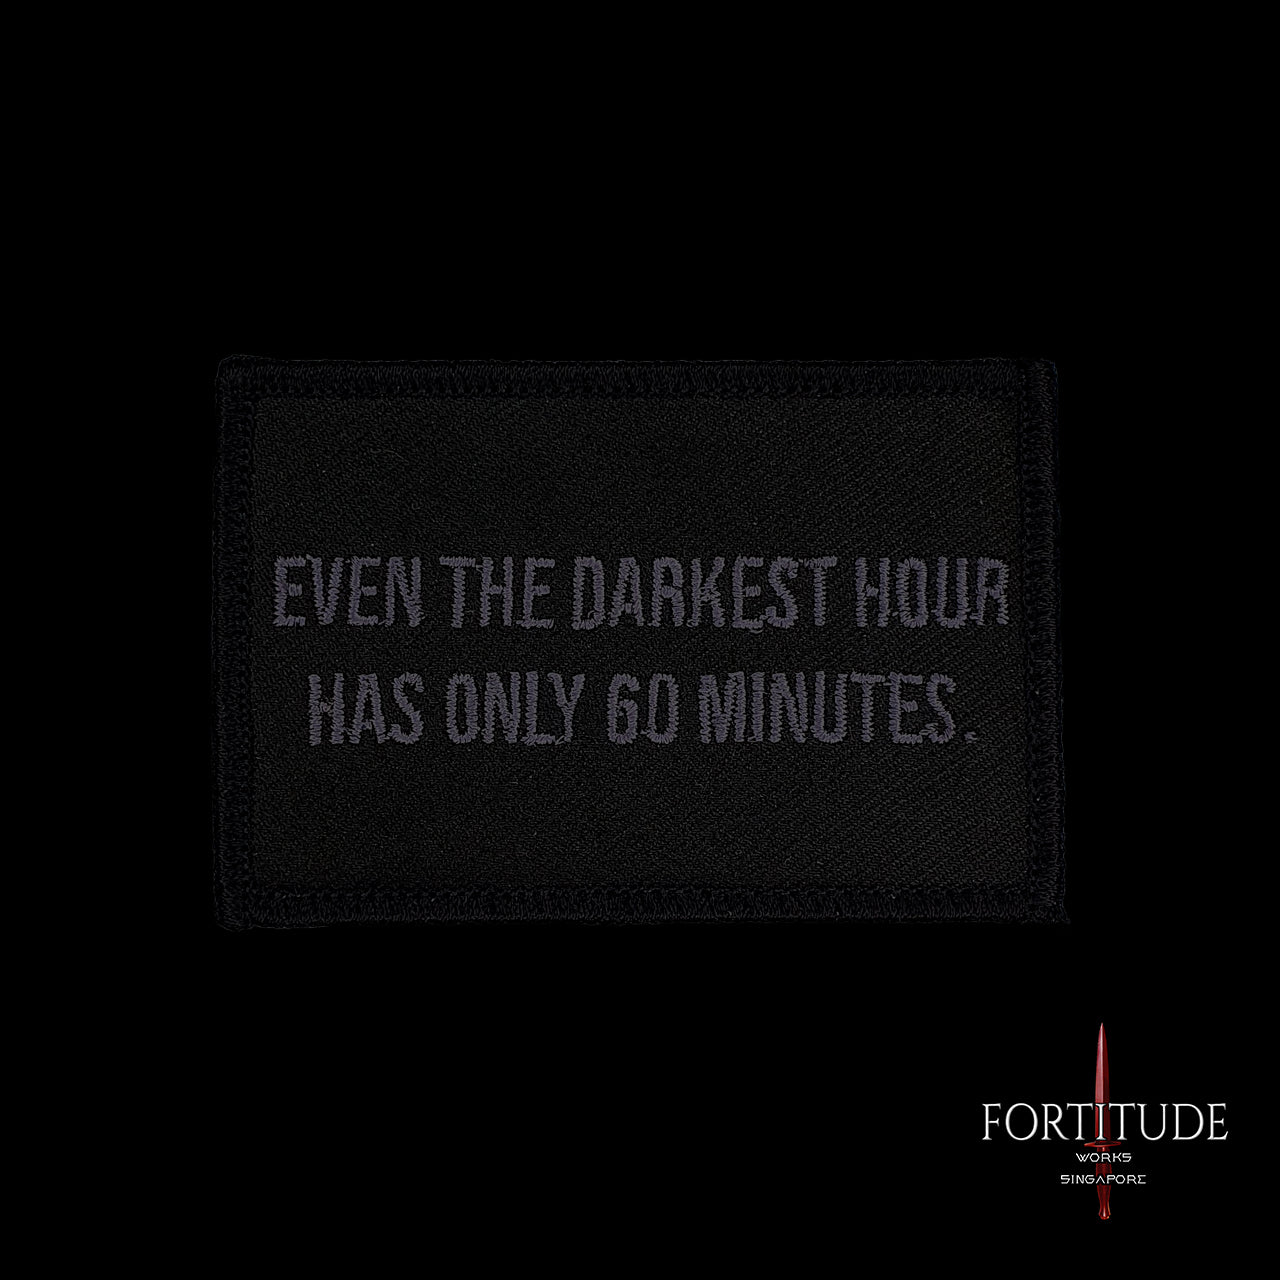 EVEN THE DARKEST HOUR HAS ONLY 60 MINUTES. - FORTITUDE WORKS SINGAPORE